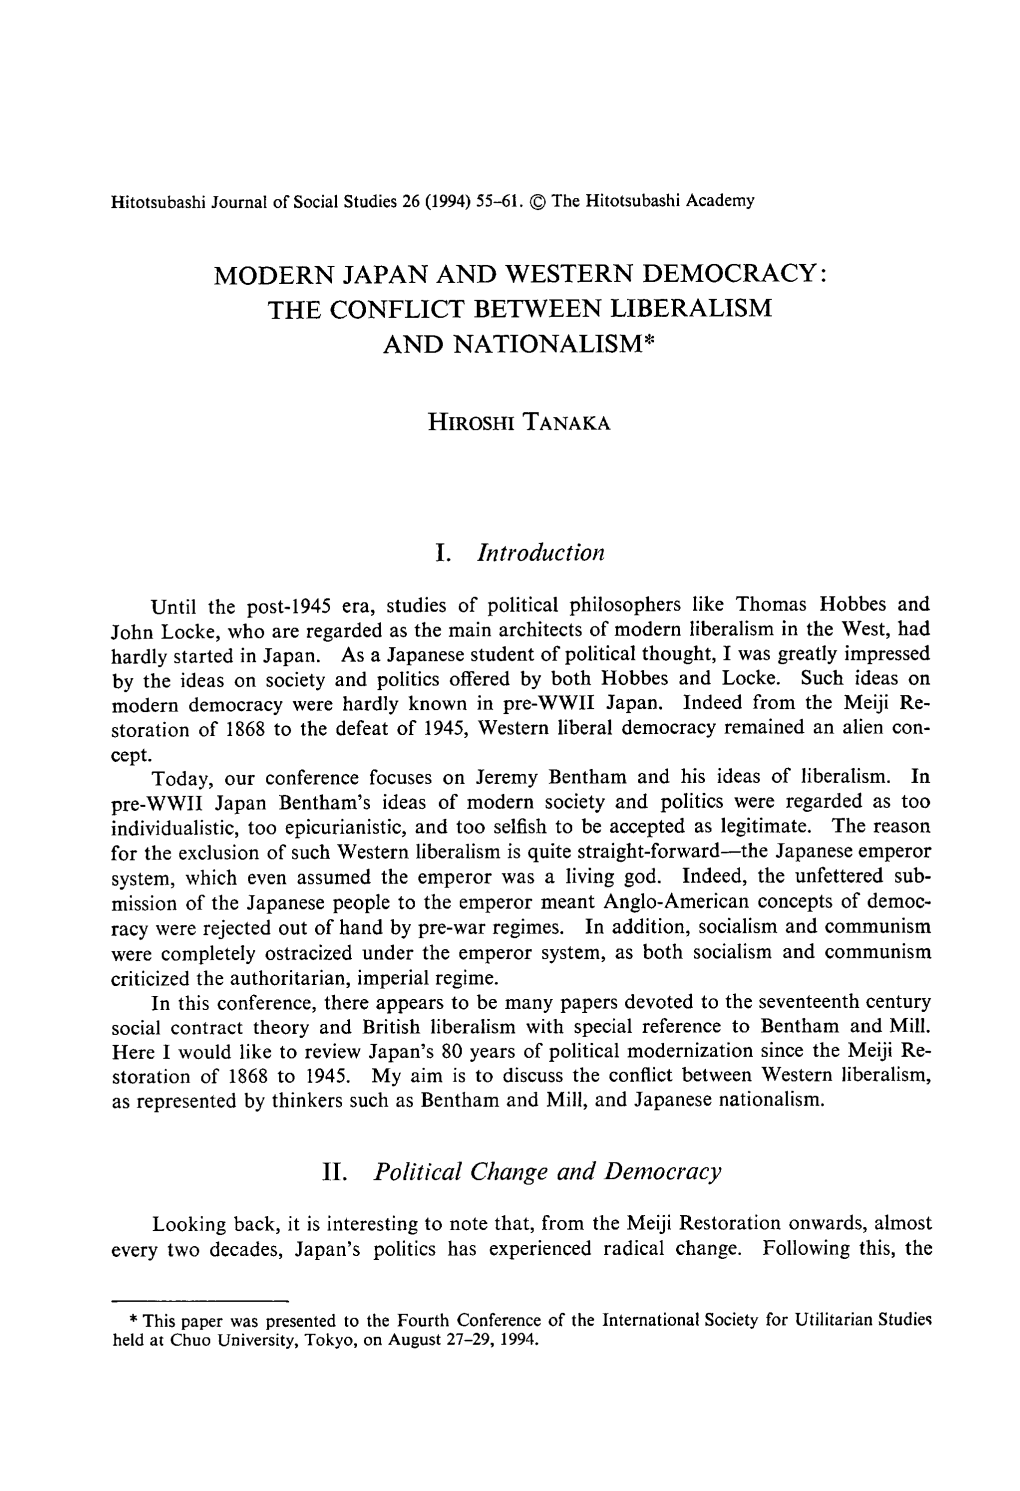 Modern Japan and Western Democracy : and Nationalism*